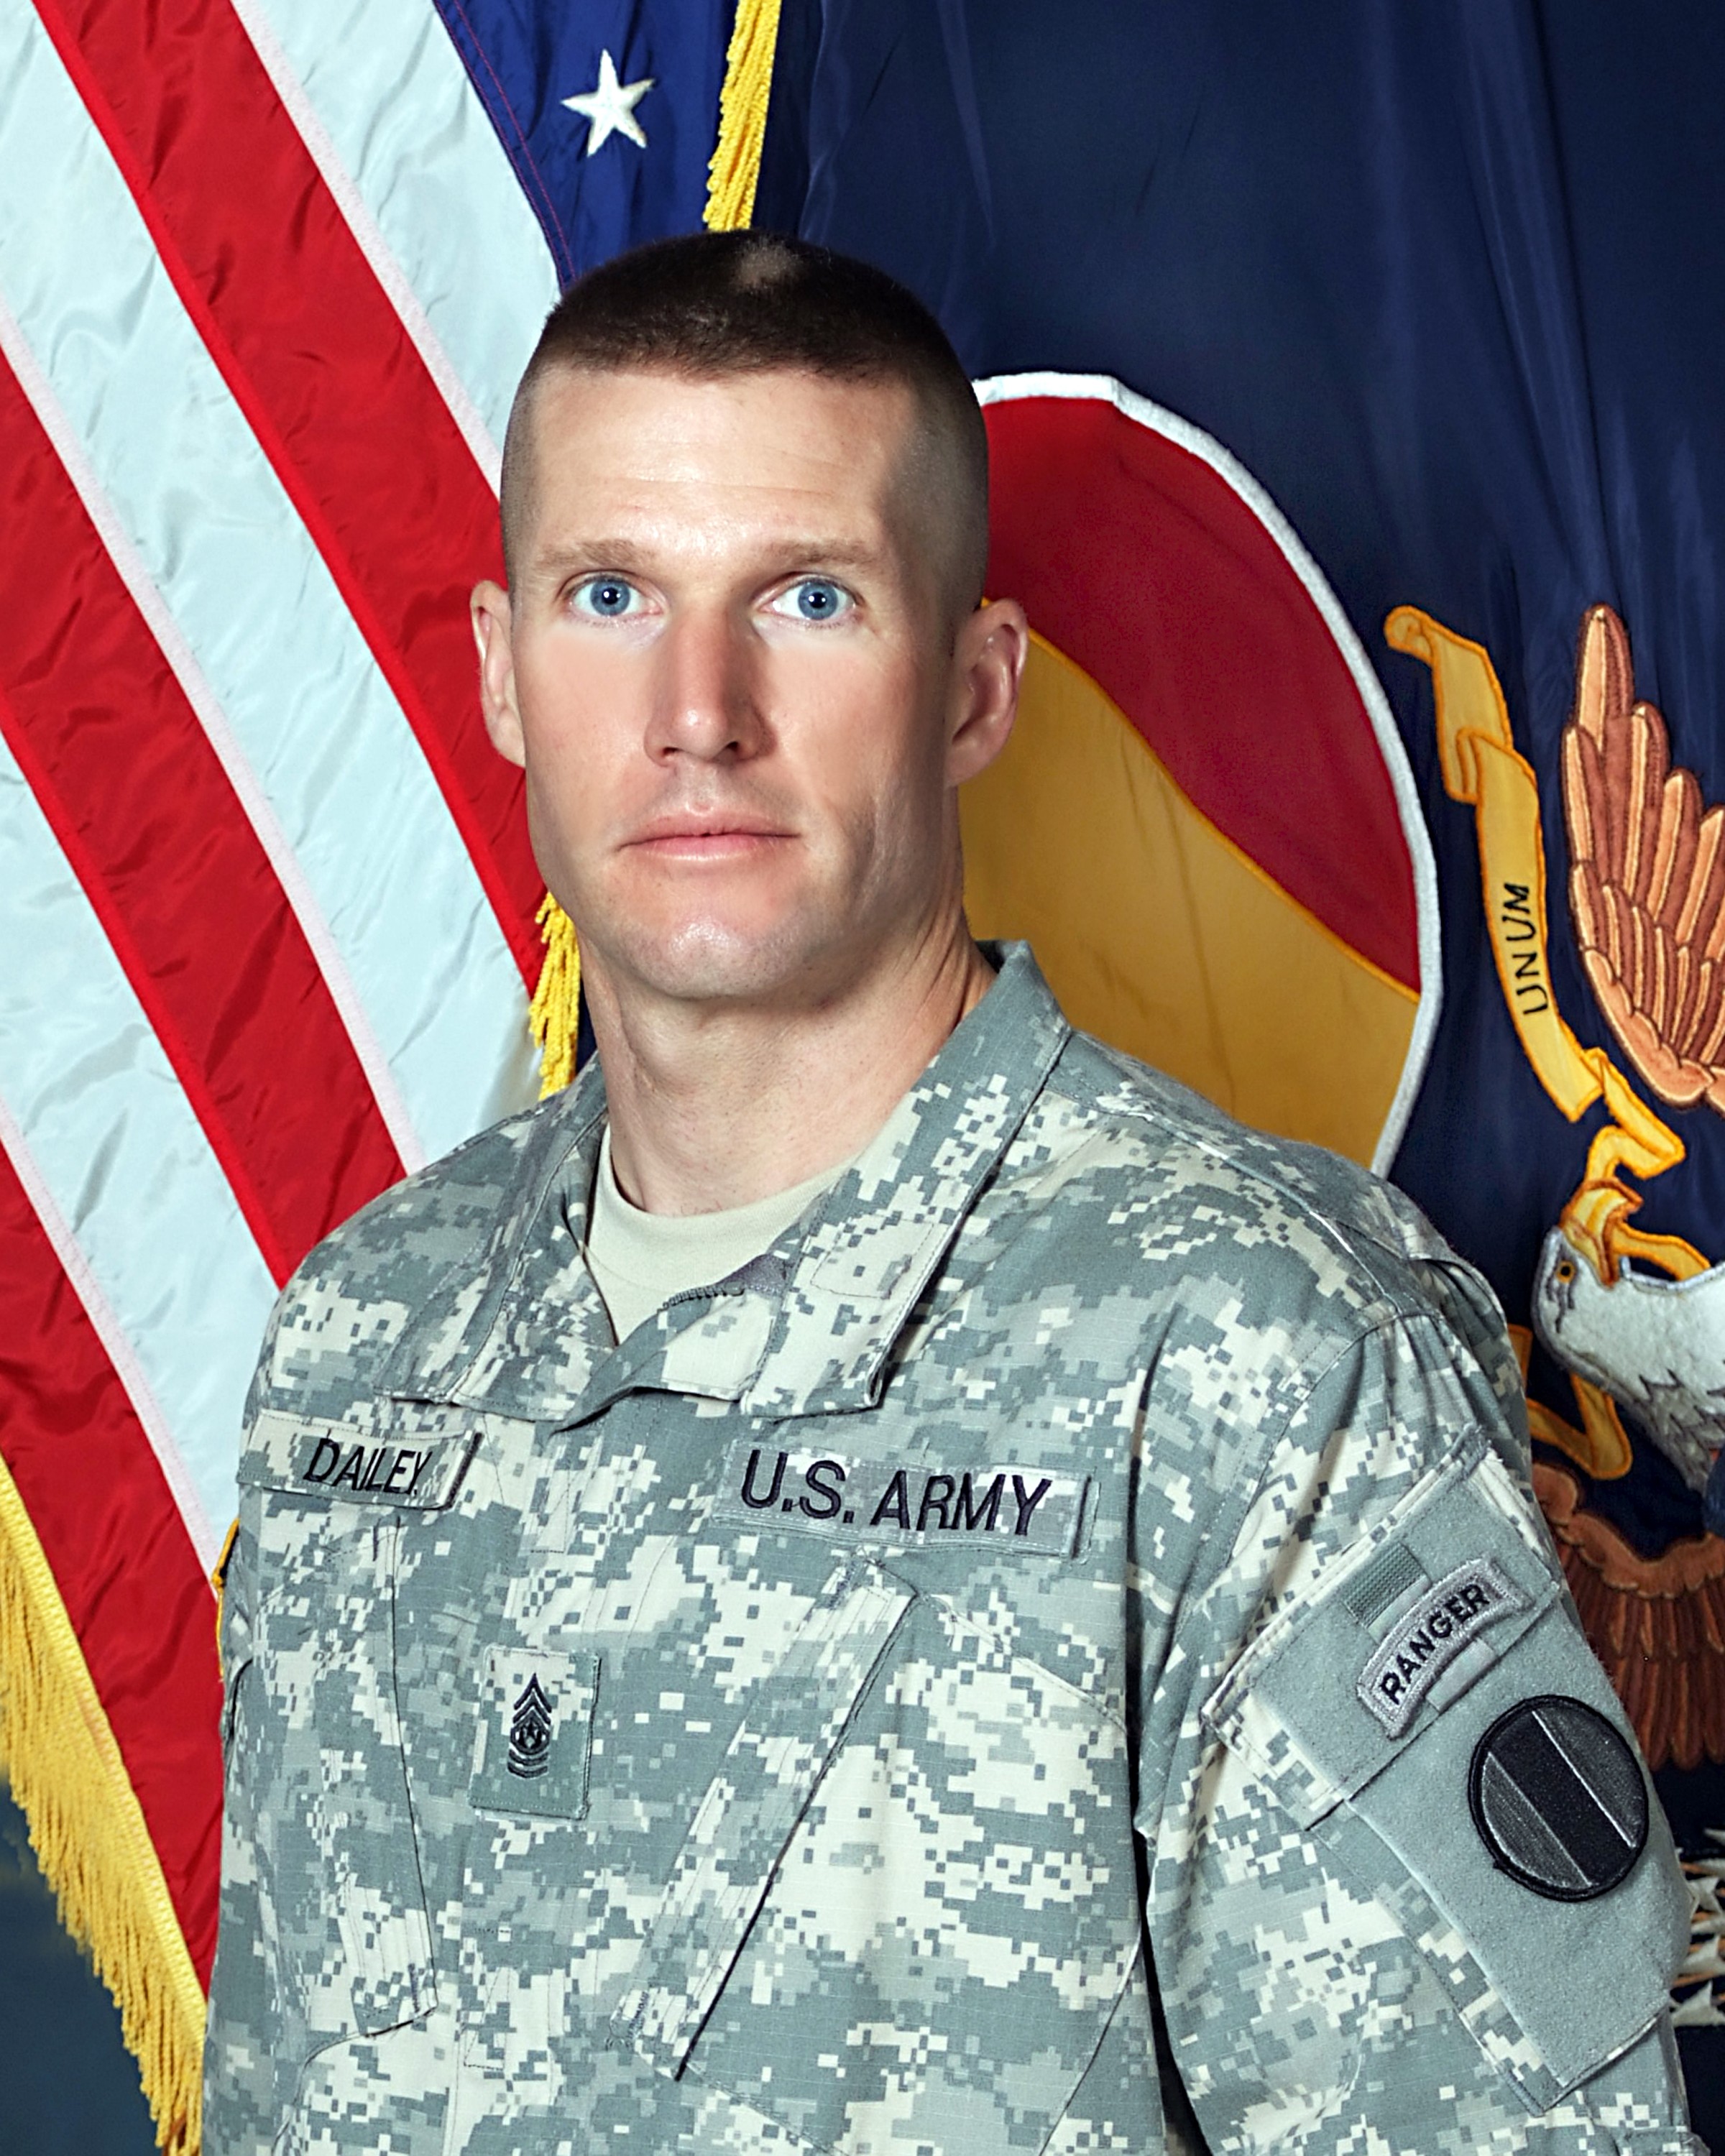 CSM Daniel A. Dailey selected to be next Sergeant Major of the Army